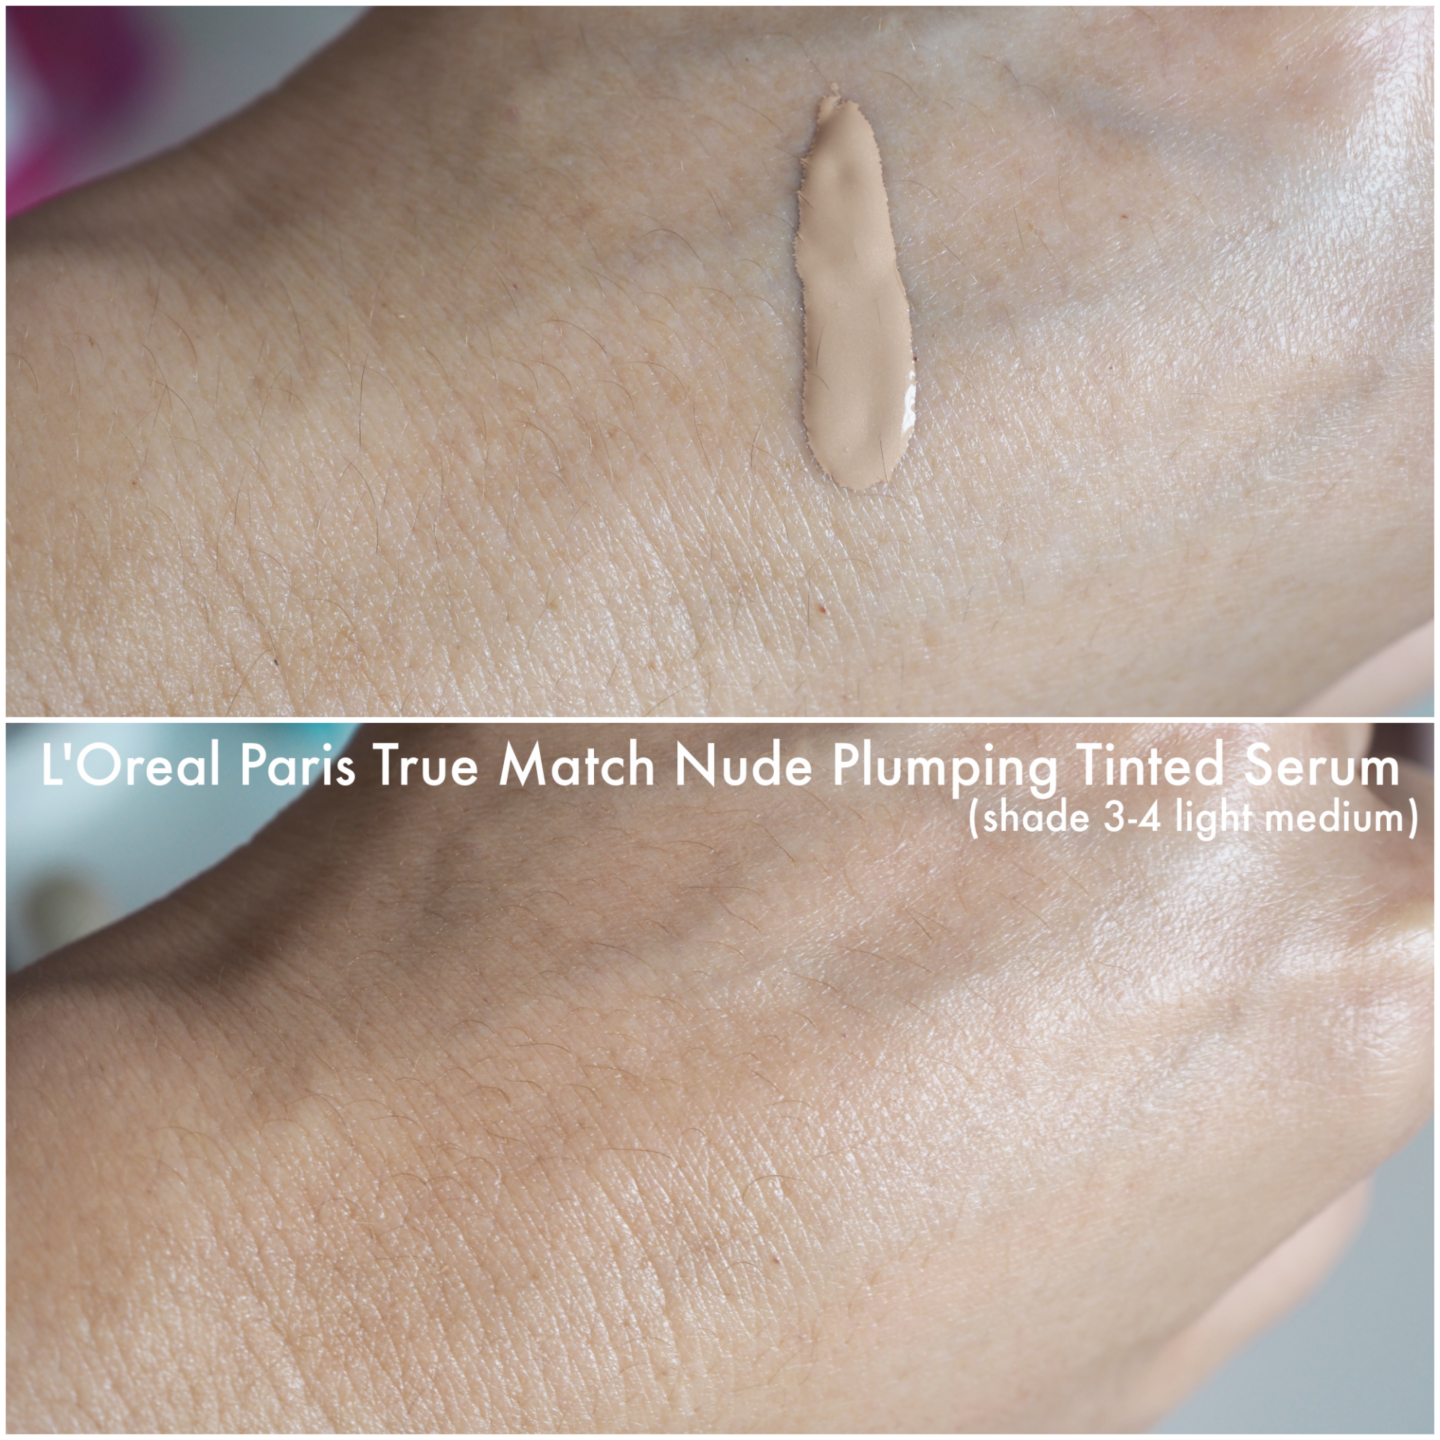 L'Oreal True Match Plumping Tinted Serum review before and after